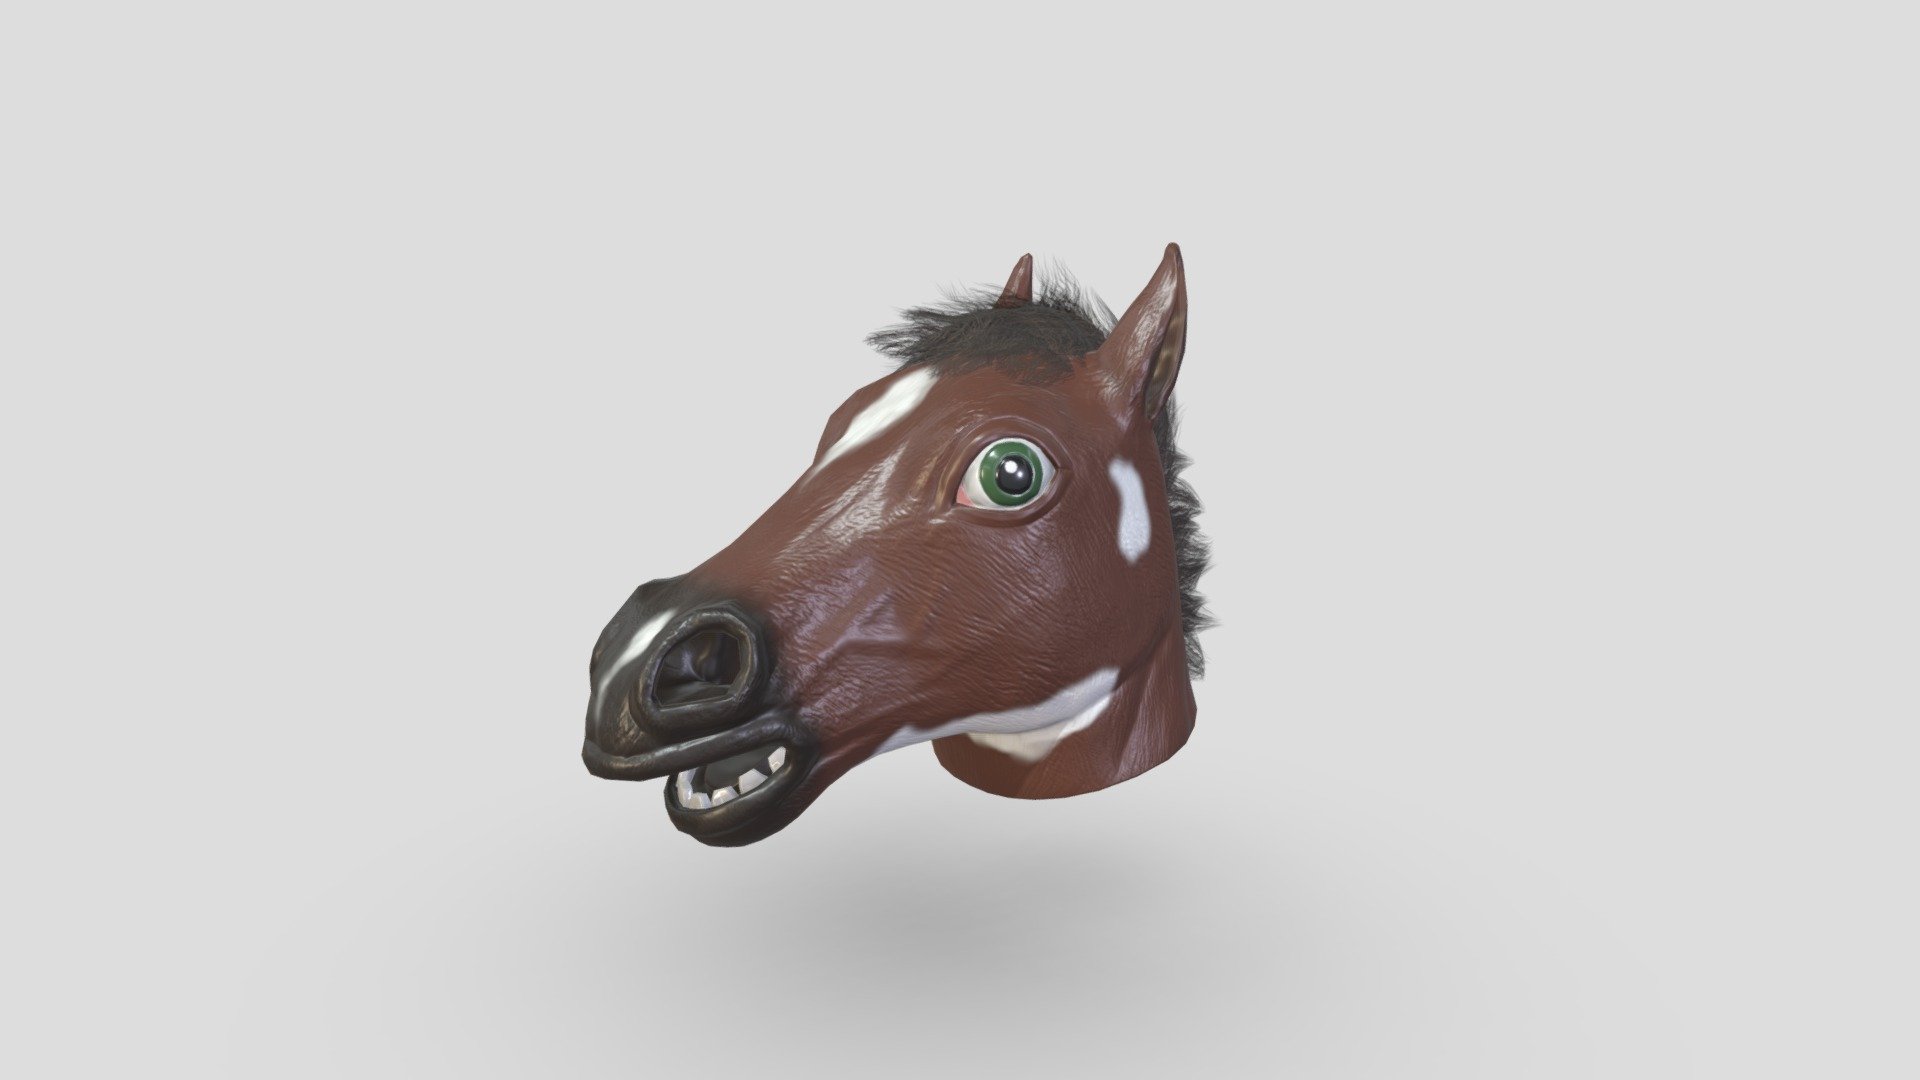 If you need additional work done do not hesitate to contact me, I am available for freelance work.

Funny Rubber Horse Head Mask with pinto coloring for a character in disguise. 

Highpoly sculpted in Nomadsculpt. Lowpoly made in Blender. Model and Concept by Me, Enya Gerber 3d model